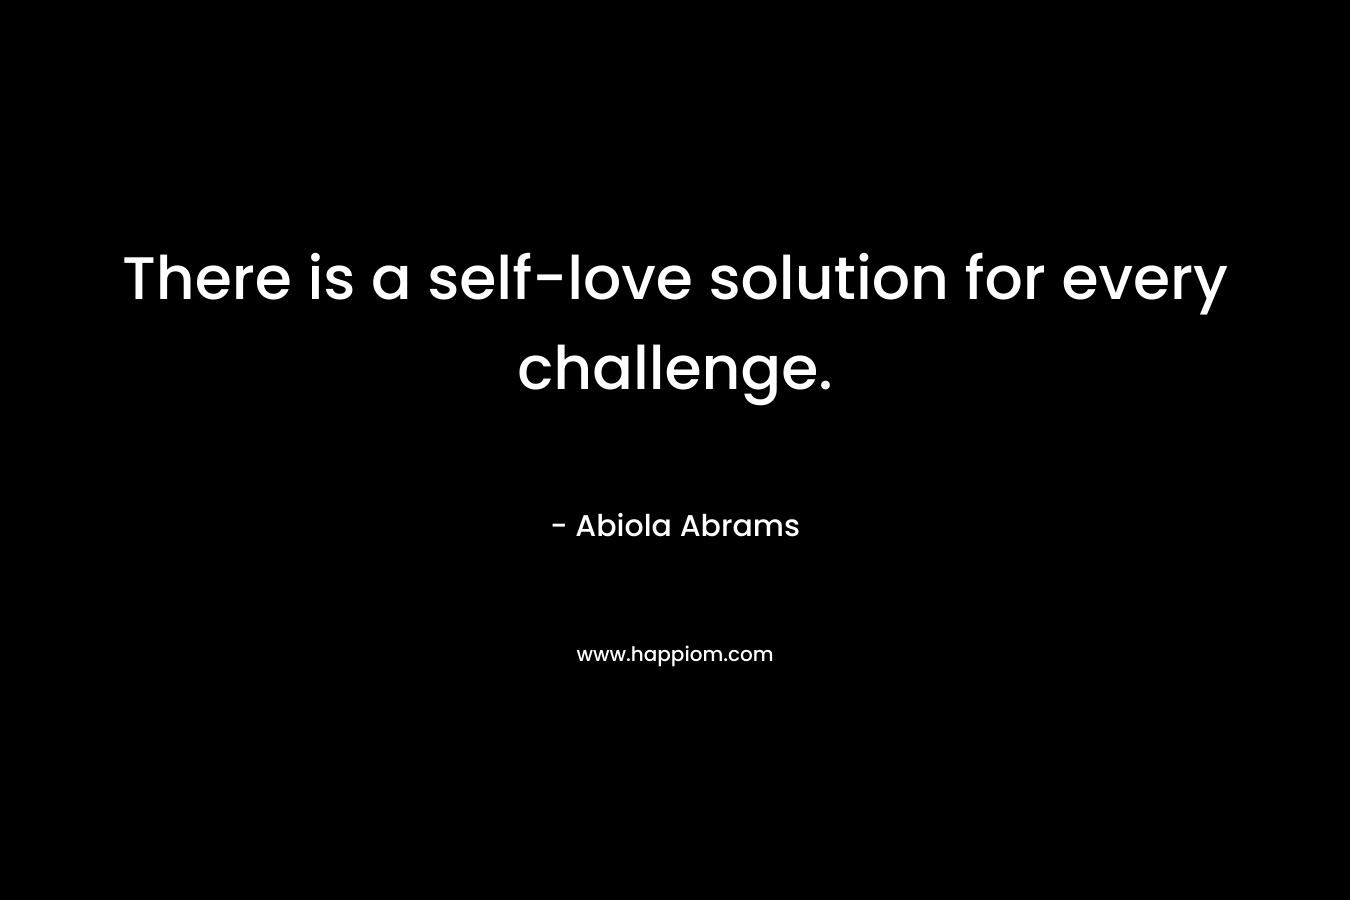 There is a self-love solution for every challenge.